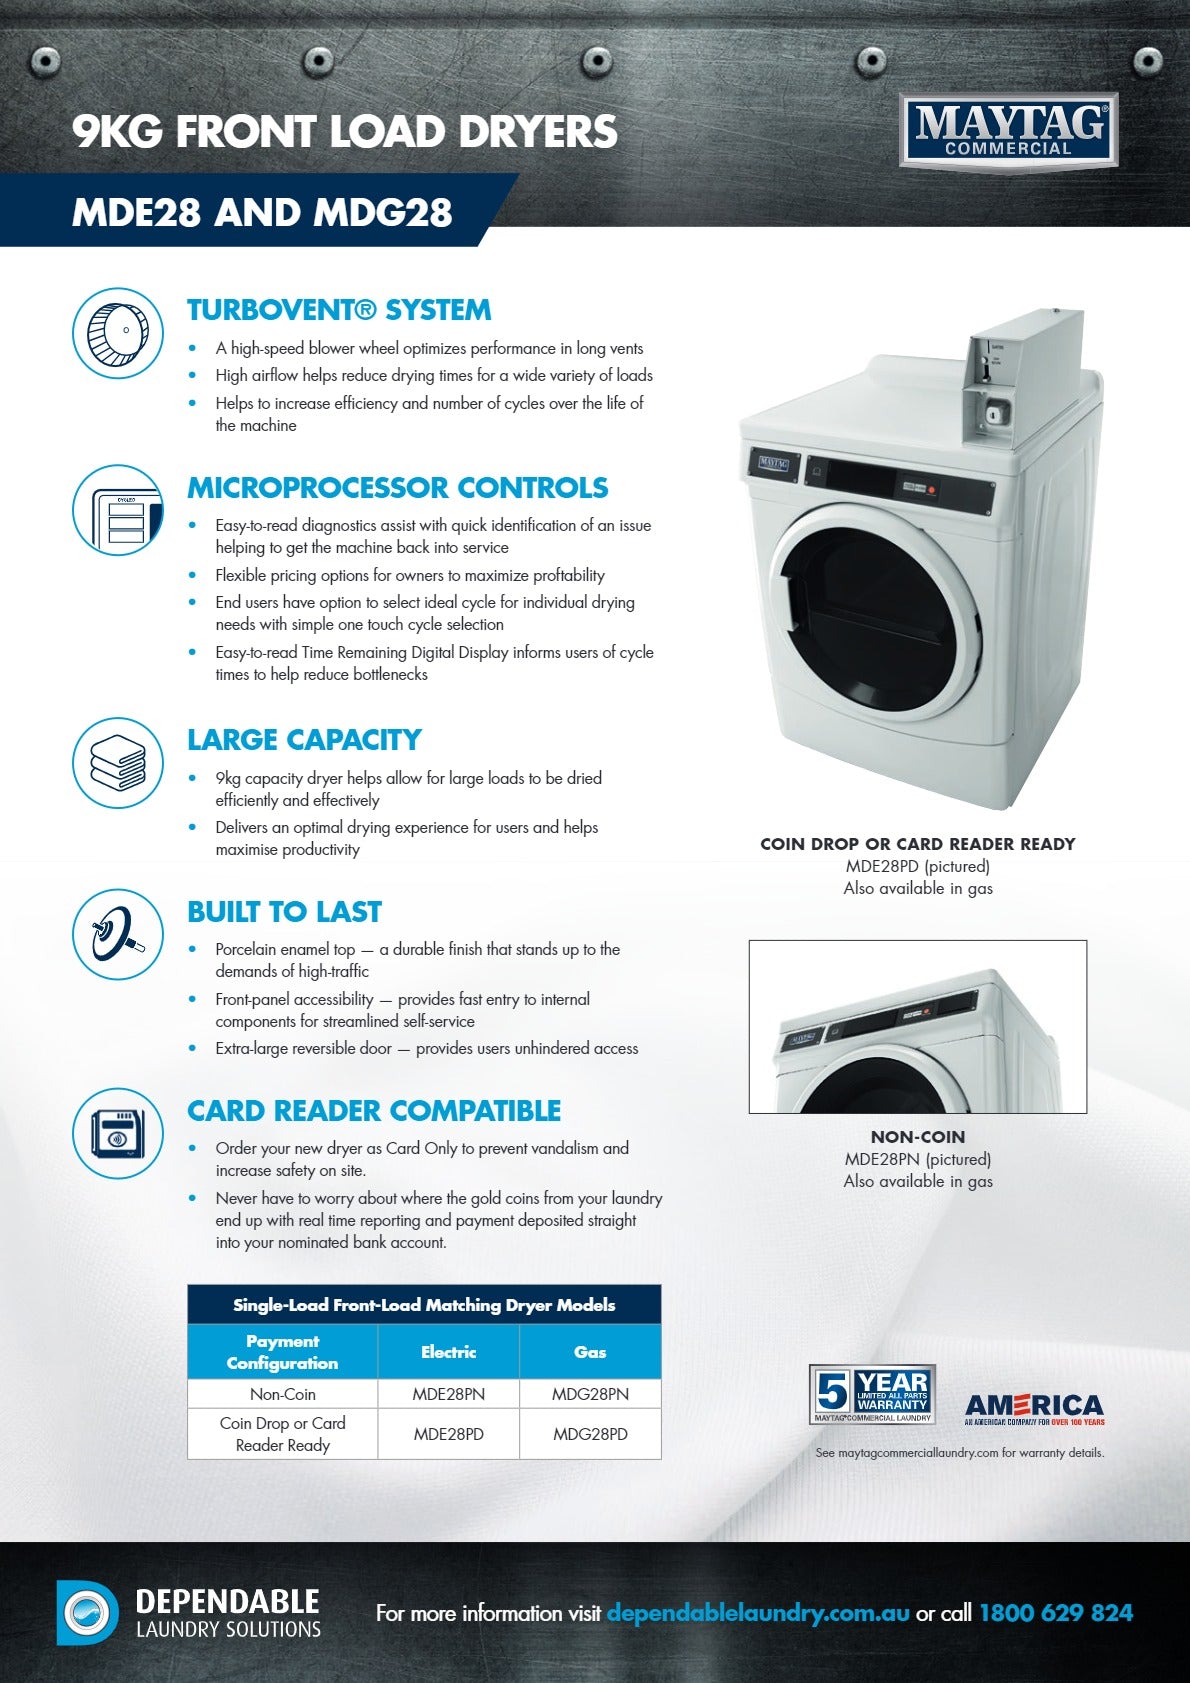 Thumbnail - Maytag Commercial MDG28PN - Electric Dryer